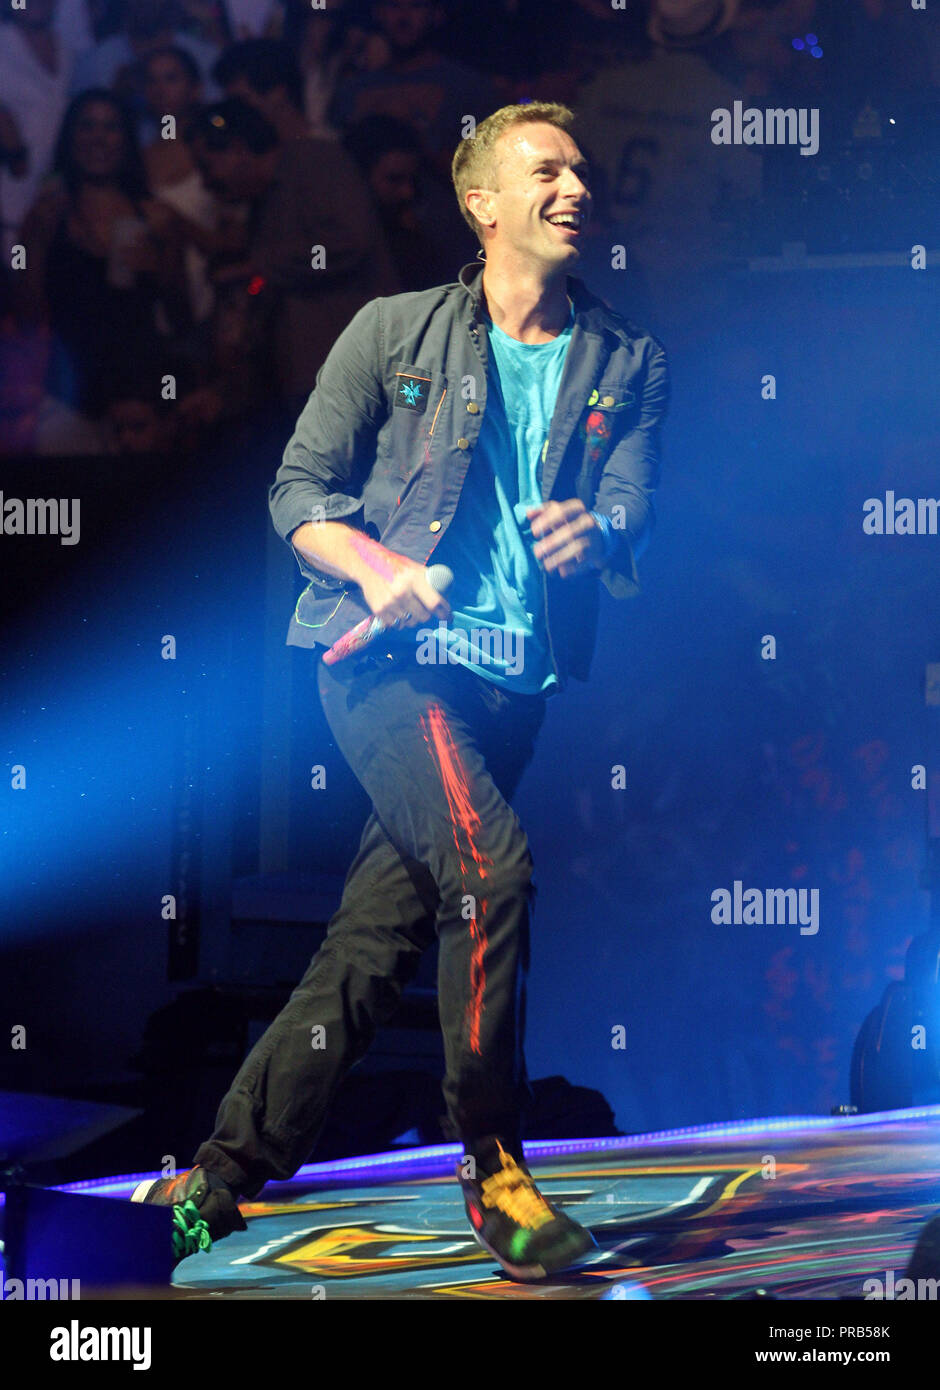 Chris Martin with Coldplay performs in concert on their Mylo Xyloto tour 2012 at the American Airlines Arena in Miami on June 29, 2012. Stock Photo